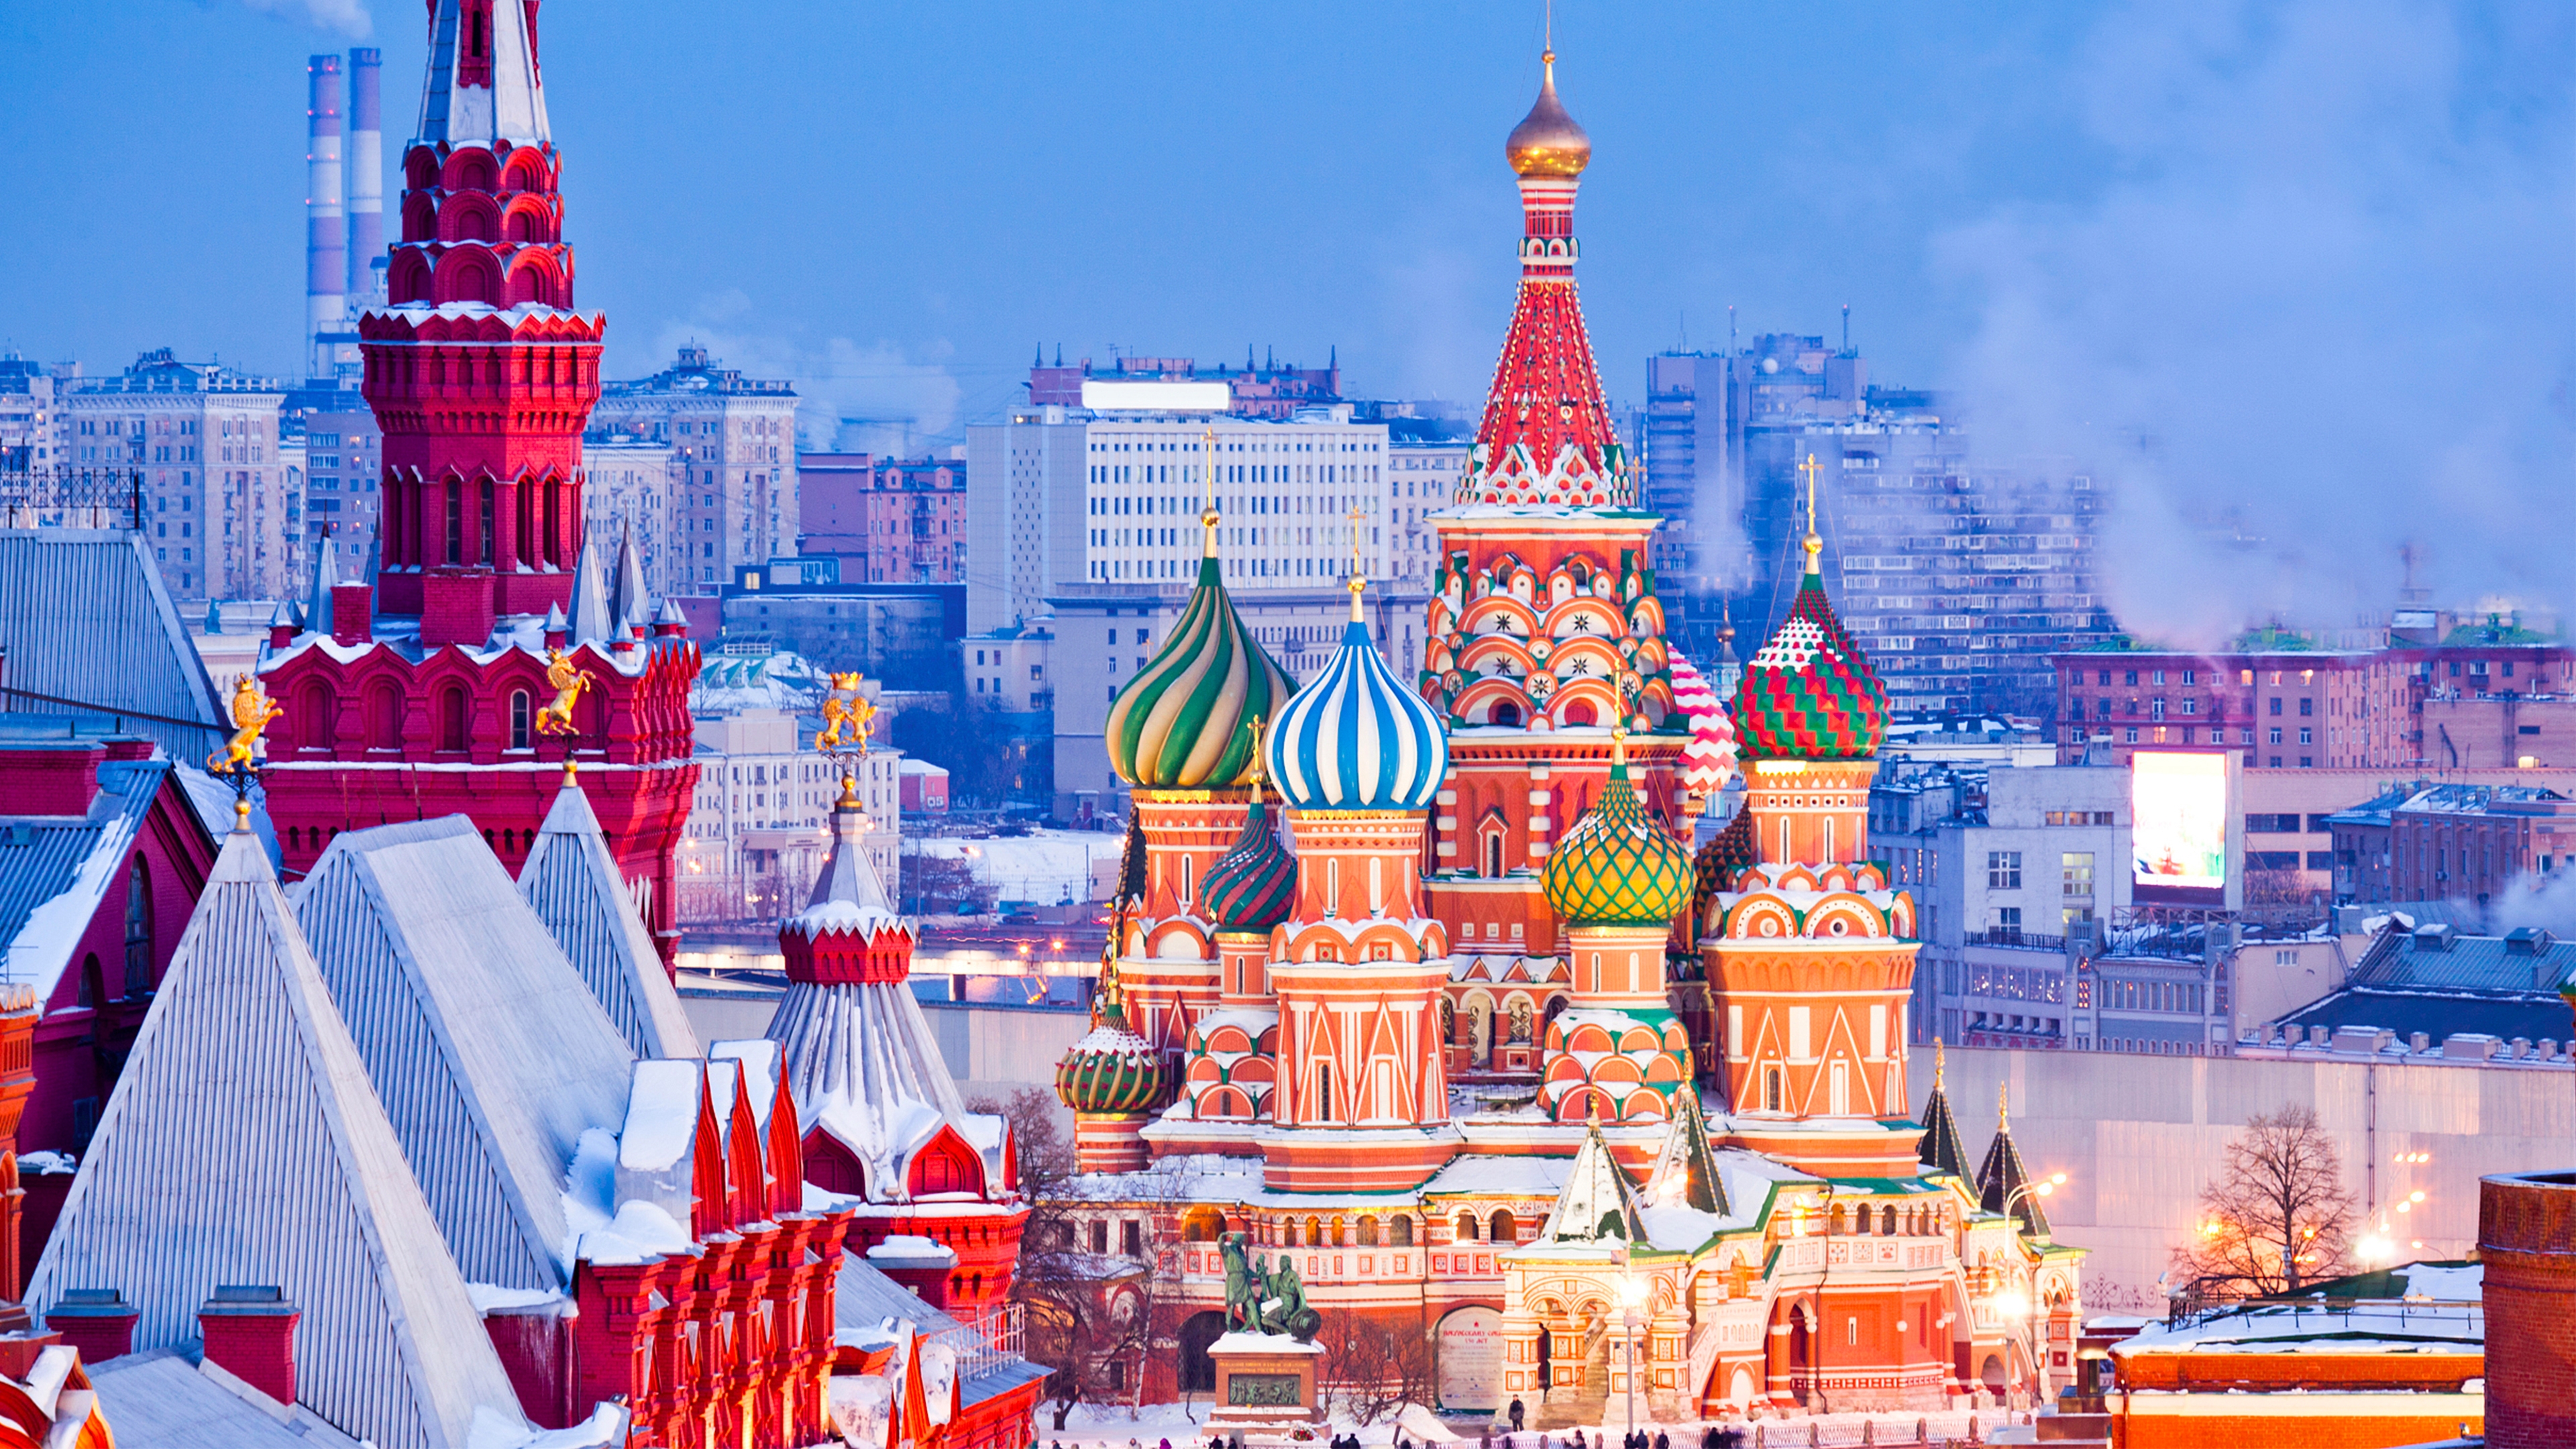 General 3840x2160 Russia building Helmet dome Saint Basil's Cathedral city Moscow landmark Europe